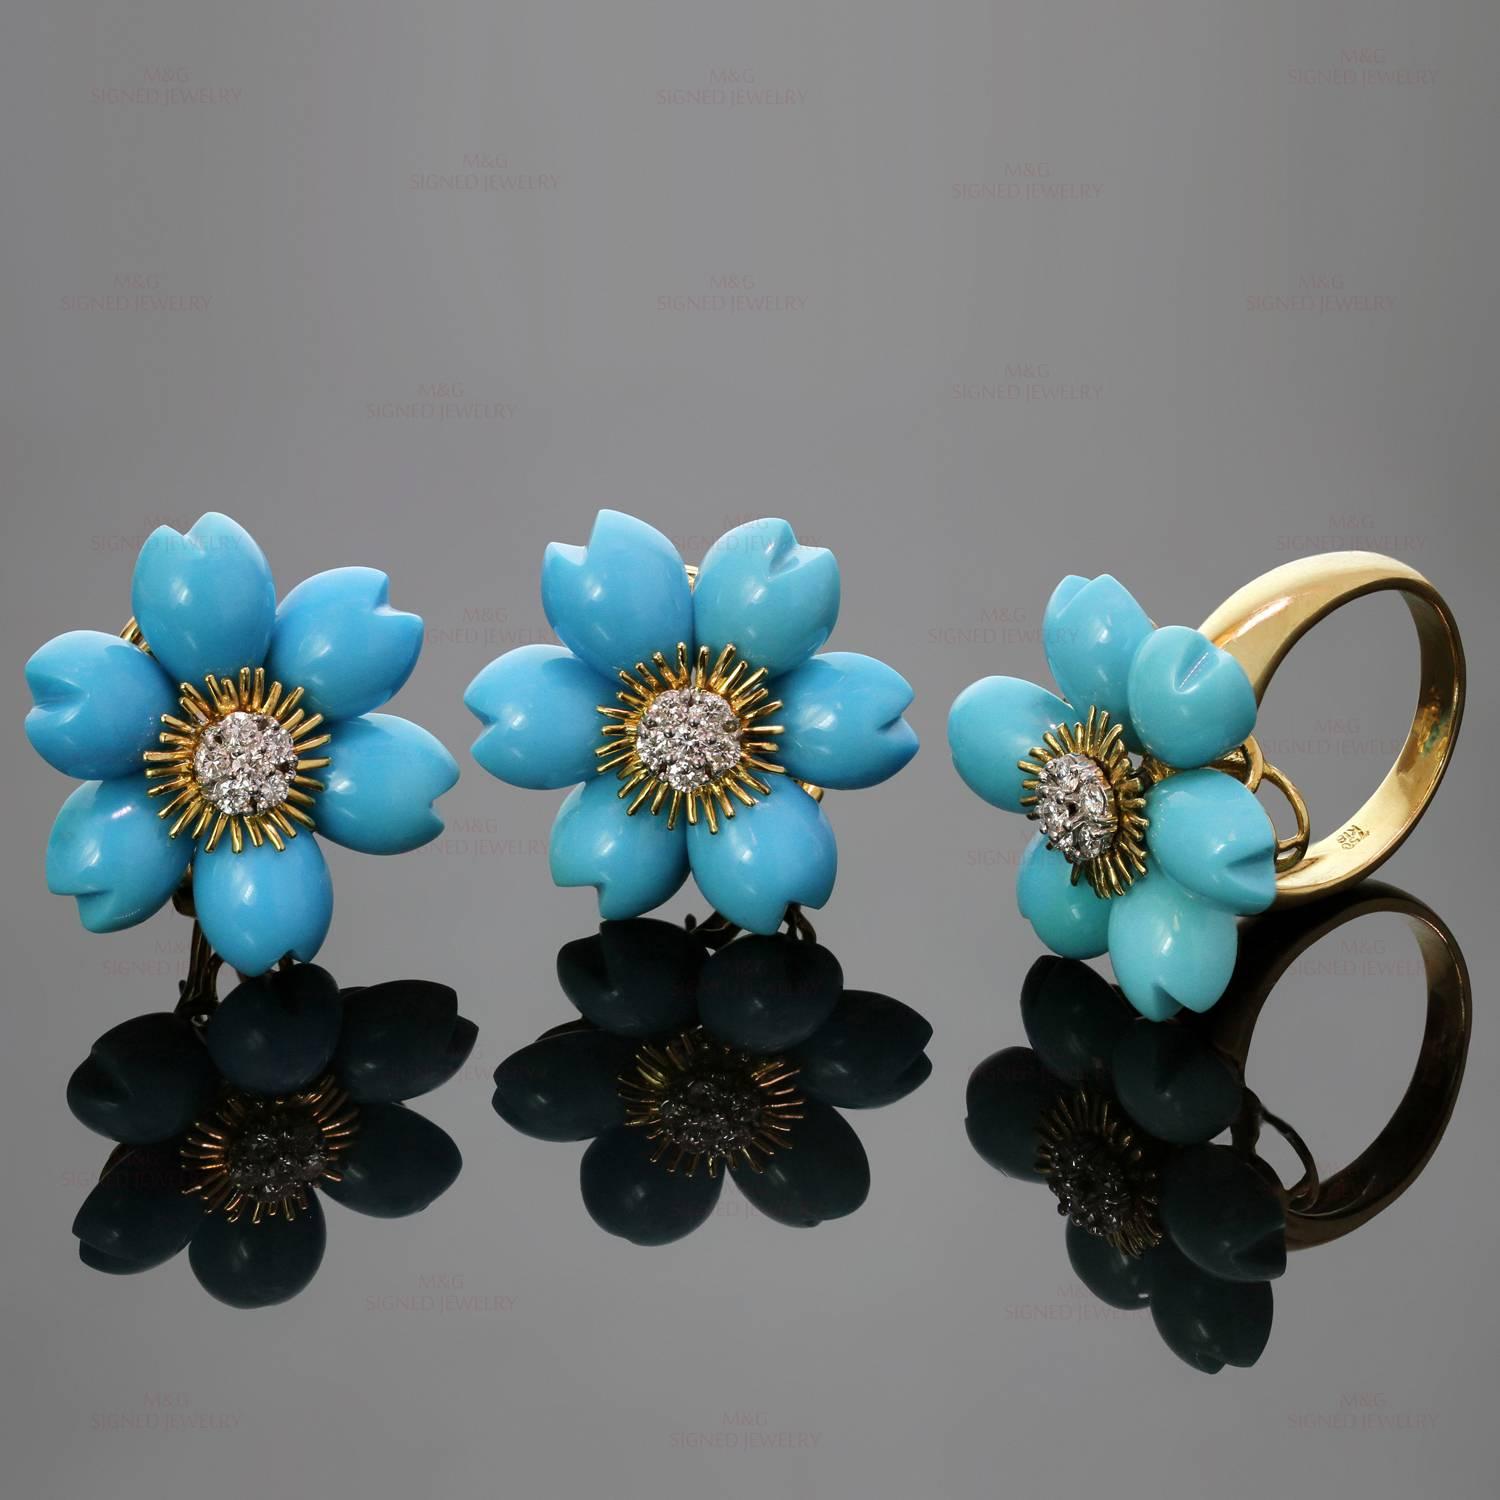 This stunning Demi Parure  earrings & ring set features a bright floral design crafted in 18k yellow gold. The clip-on earrings are set with 12 carved turquoise petals and 12 round brilliant-cut diamonds weighing an estimated 0.45 carats and are